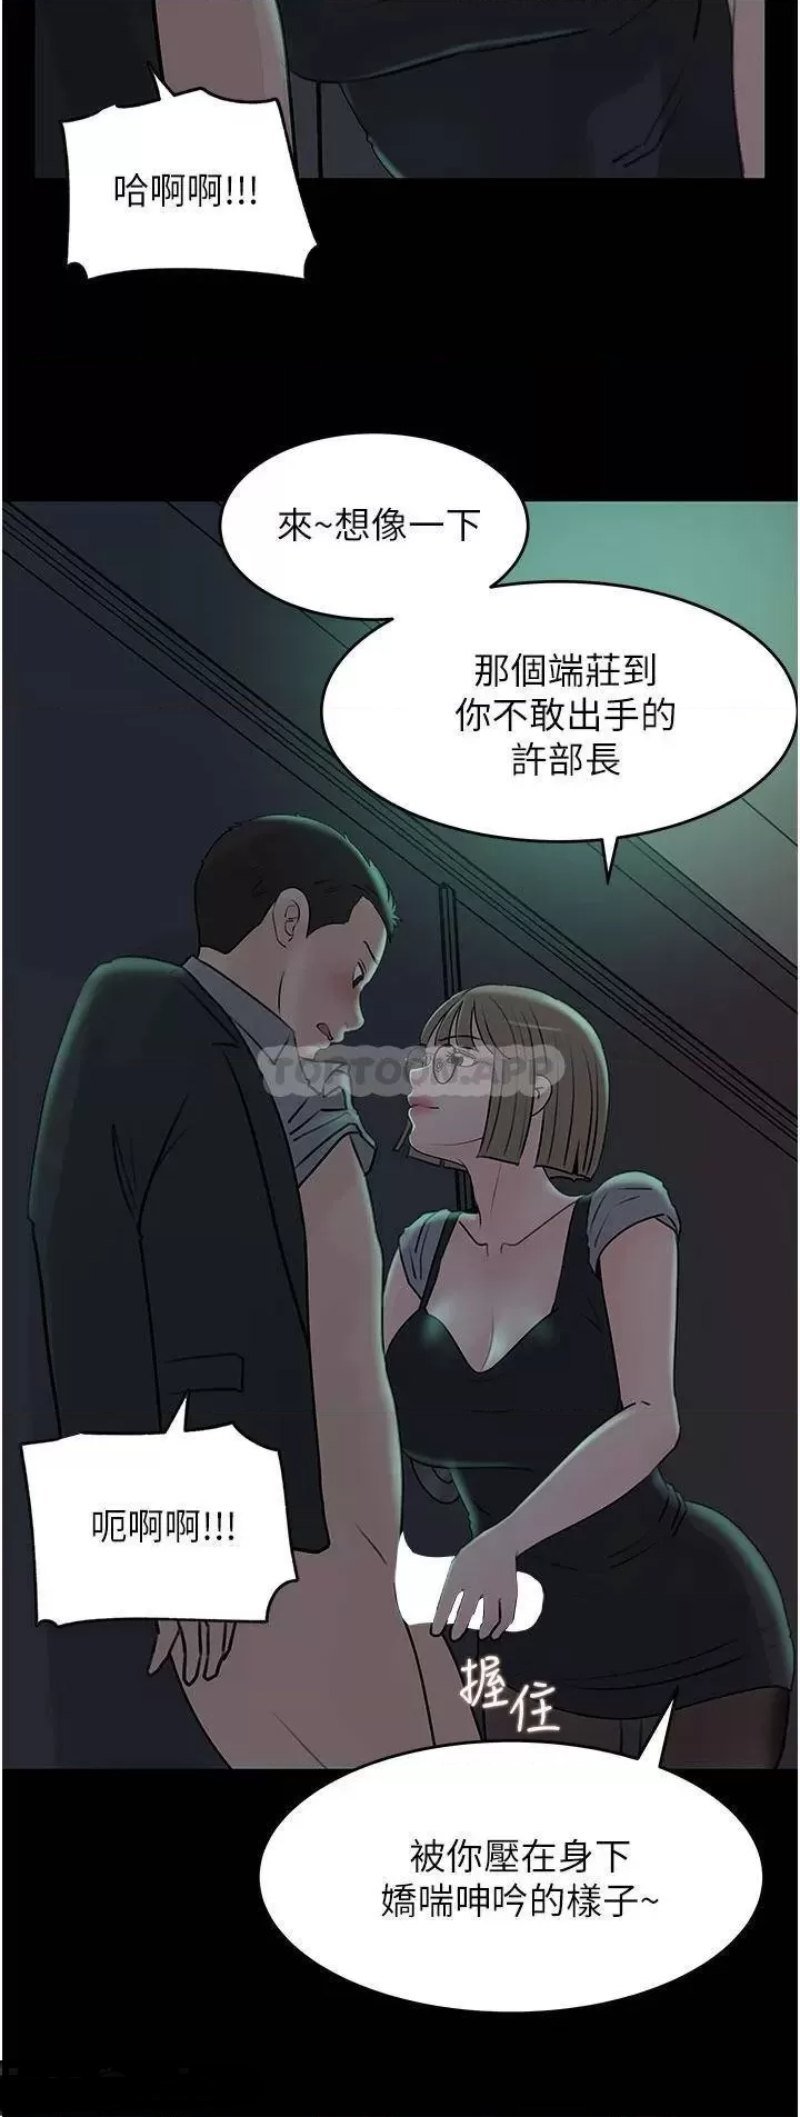 in-my-sister-in-law-raw-chap-24-27